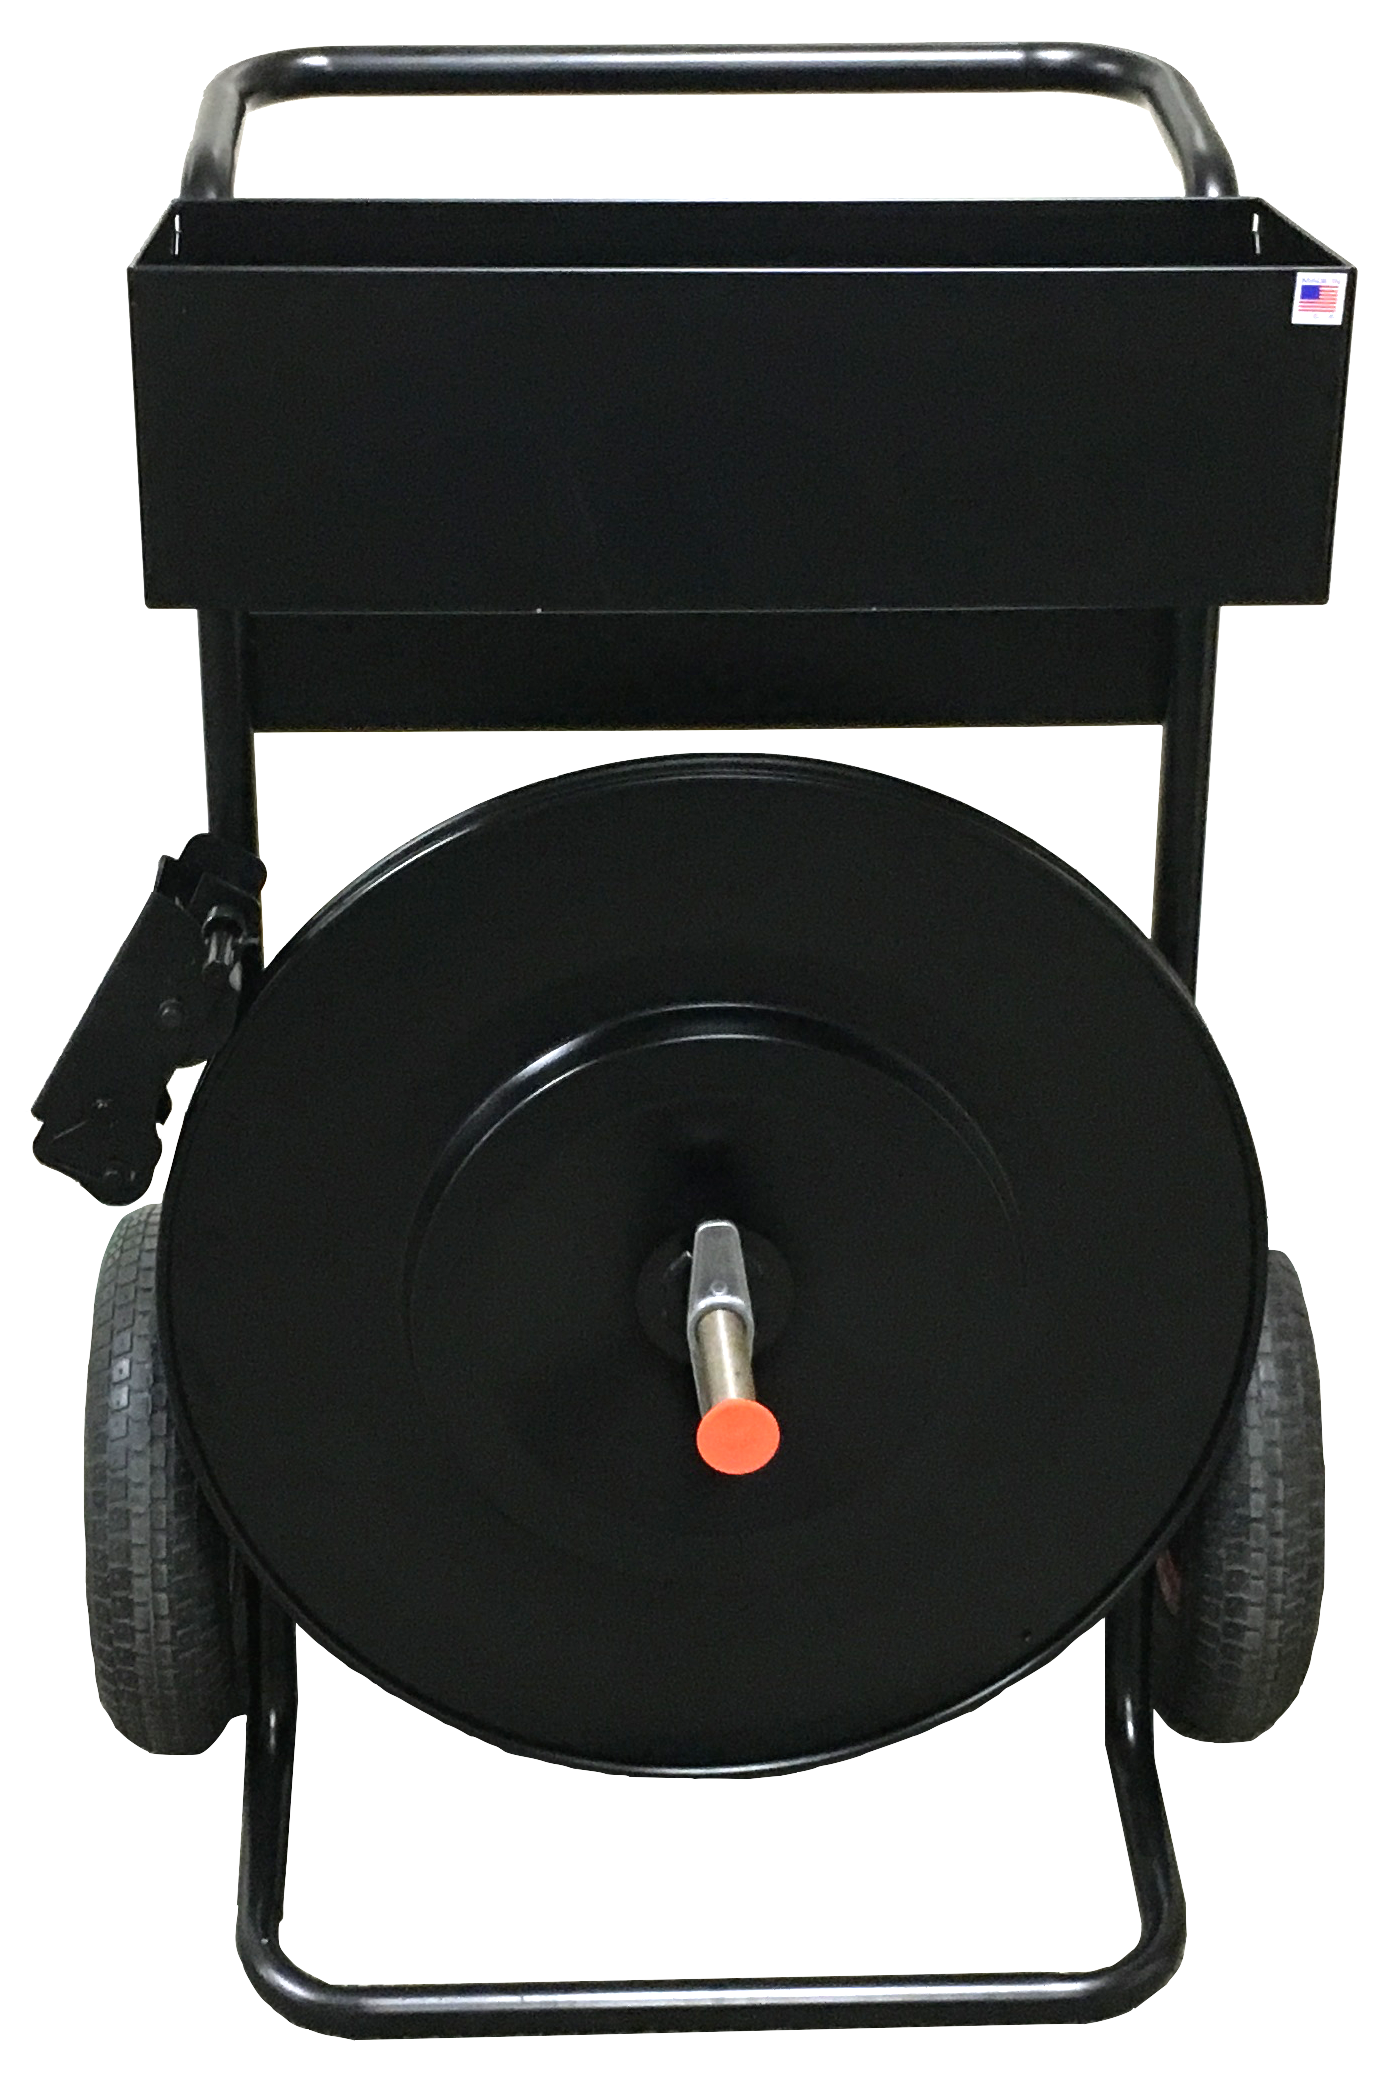 Monster Cart Heavy Duty Strapping Dispenser - Works with Poly and Steel Strapping - For 3/4", 1 1/4", and 2" Strap Widths - EP-3400 - Made in USA